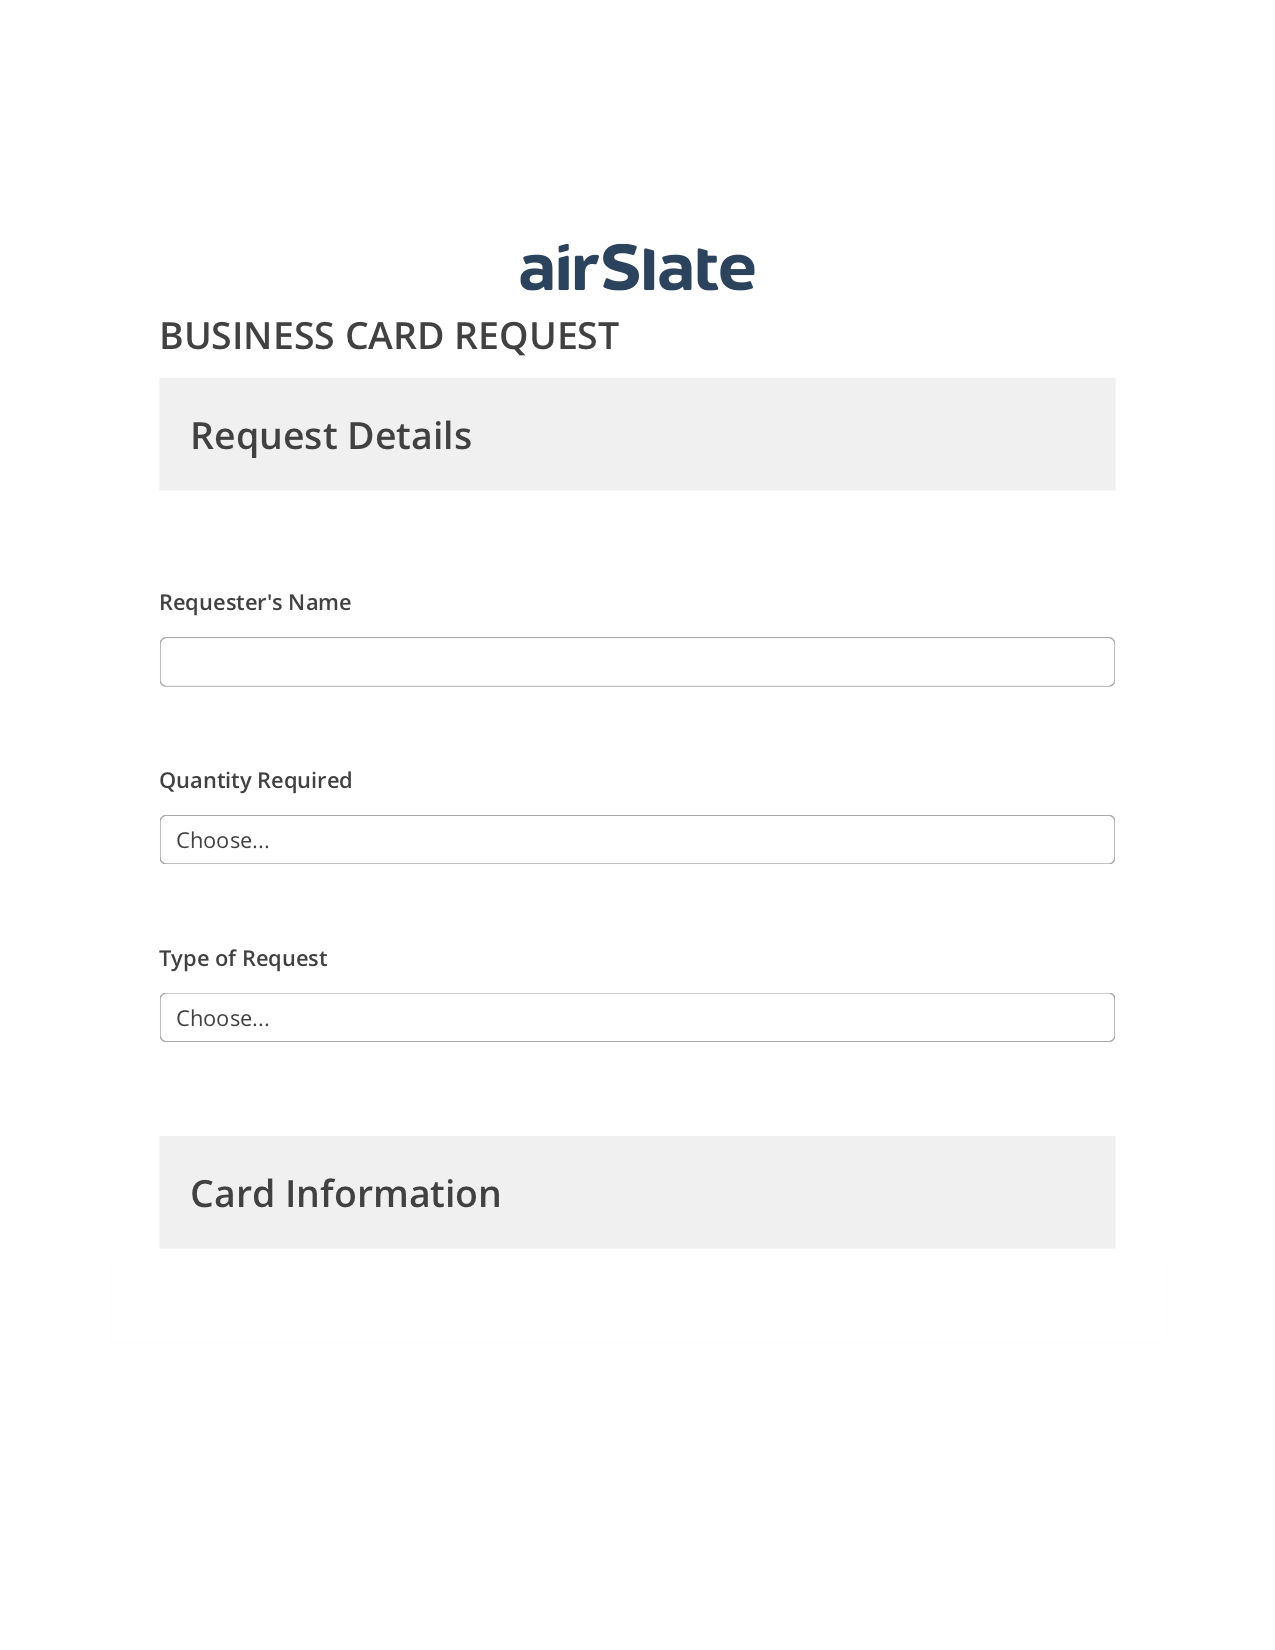 Business Card Request Flow Export to MySQL Bot